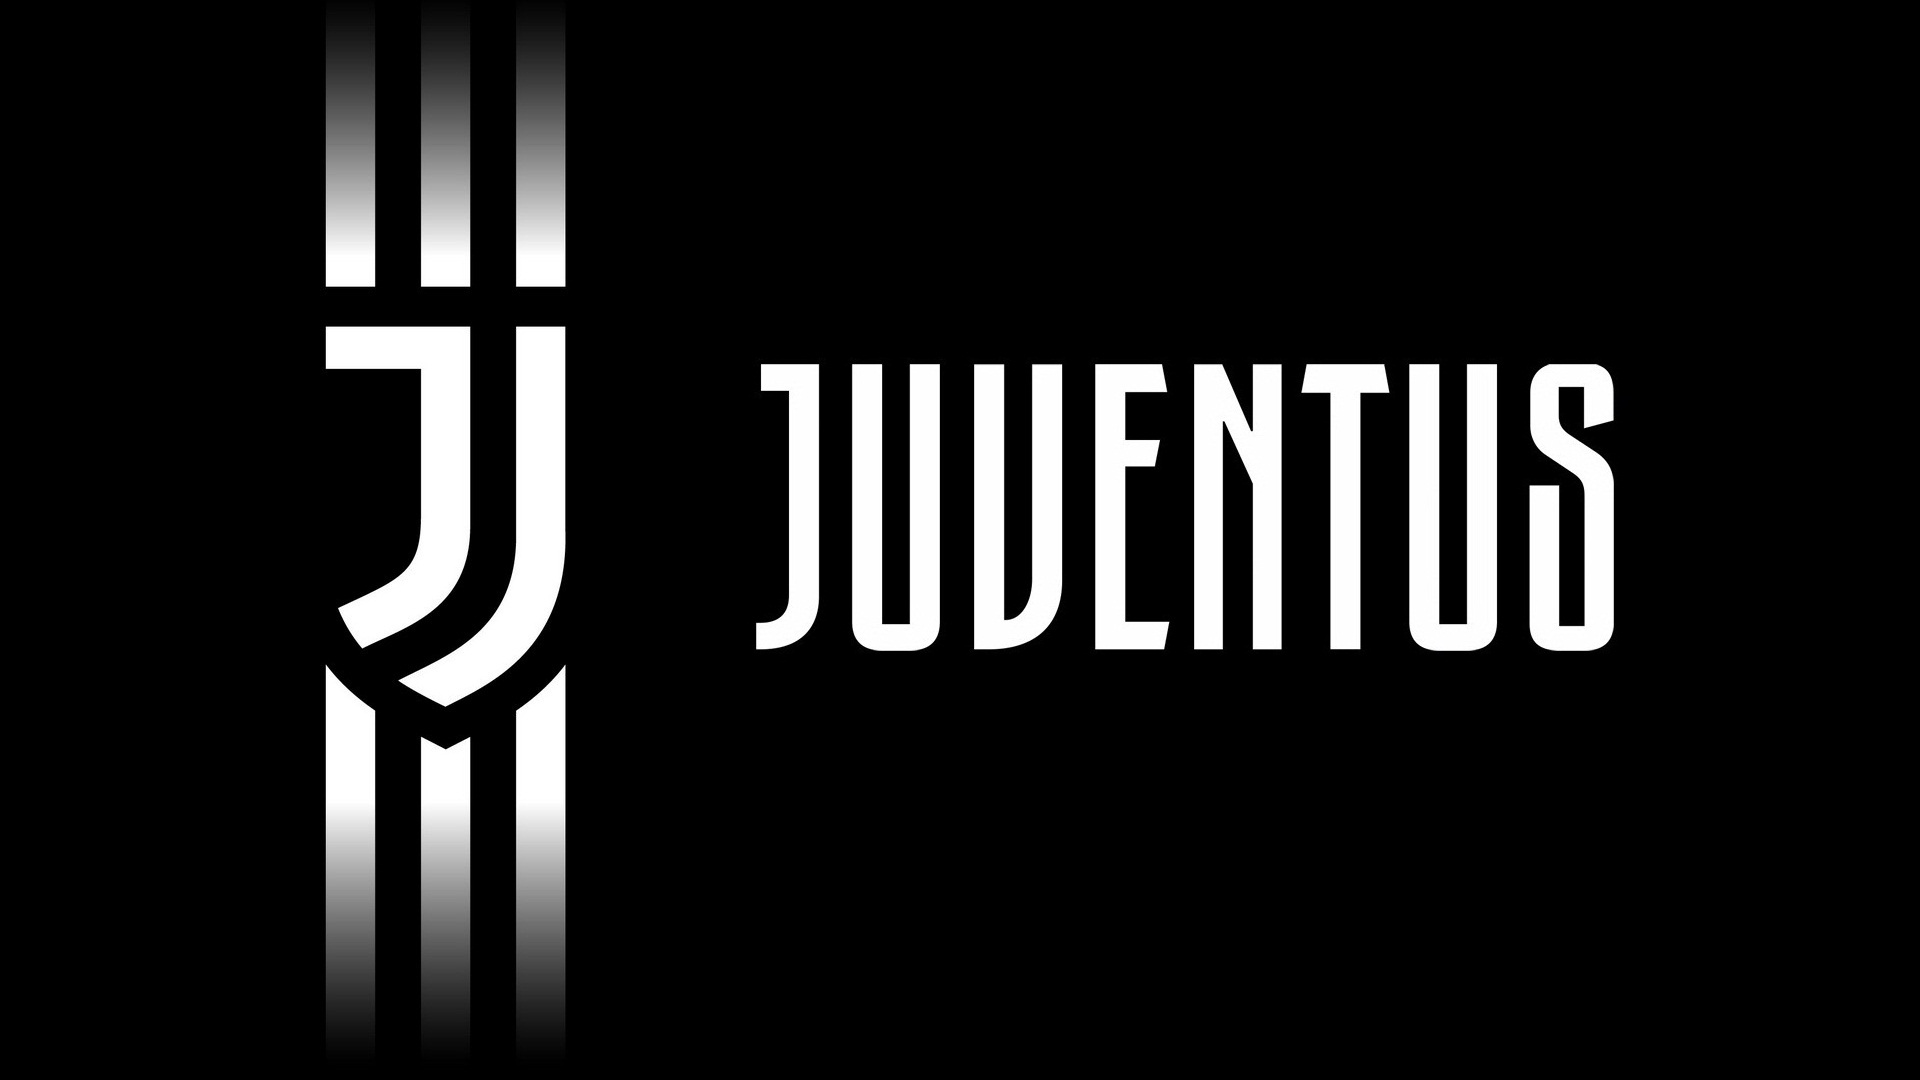 Wallpaper Desktop Juventus Soccer HD With Resolution 1920X1080 pixel. You can make this wallpaper for your Mac or Windows Desktop Background, iPhone, Android or Tablet and another Smartphone device for free